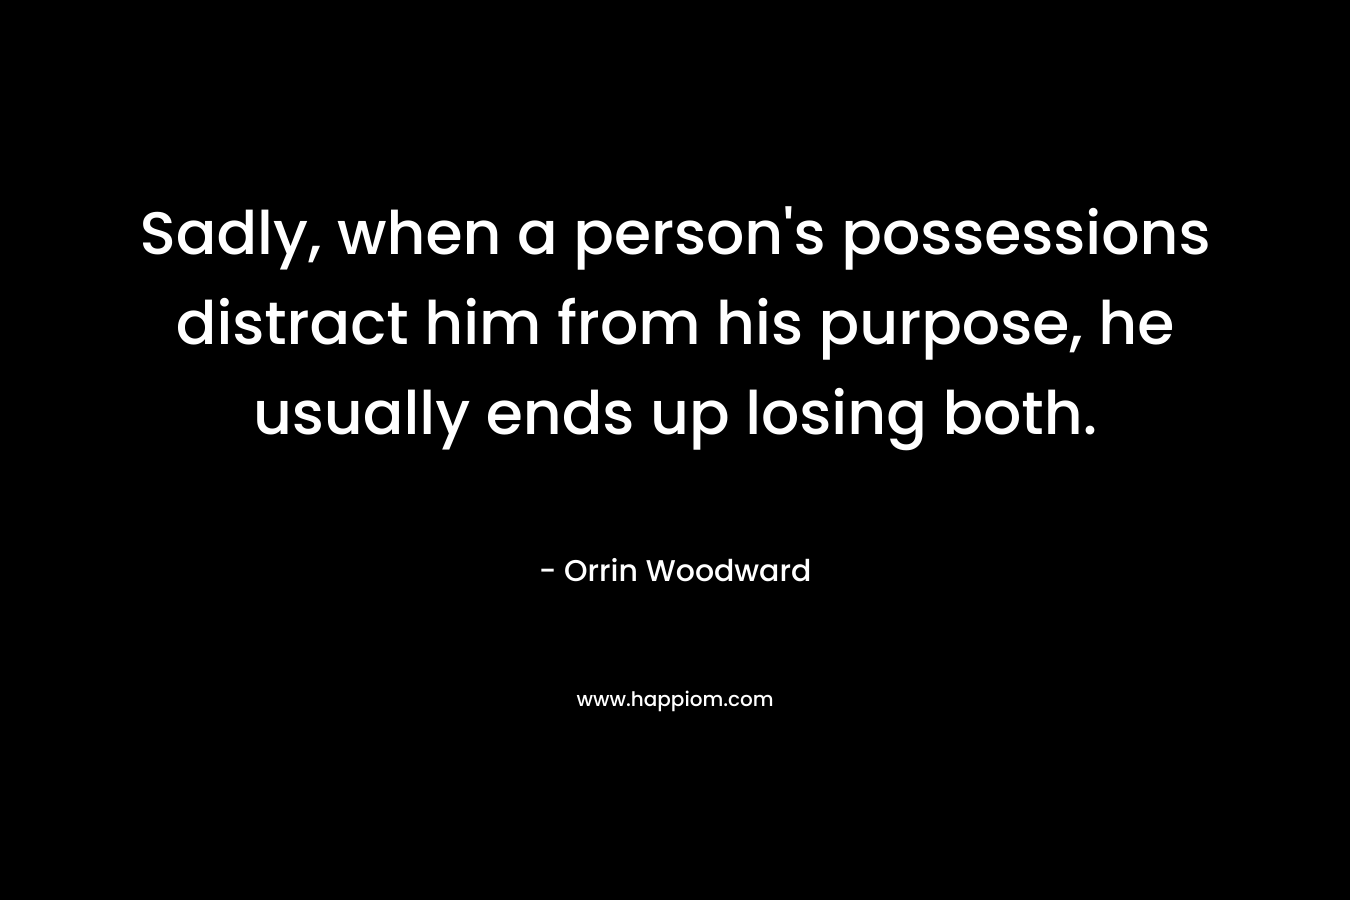 Sadly, when a person's possessions distract him from his purpose, he usually ends up losing both.